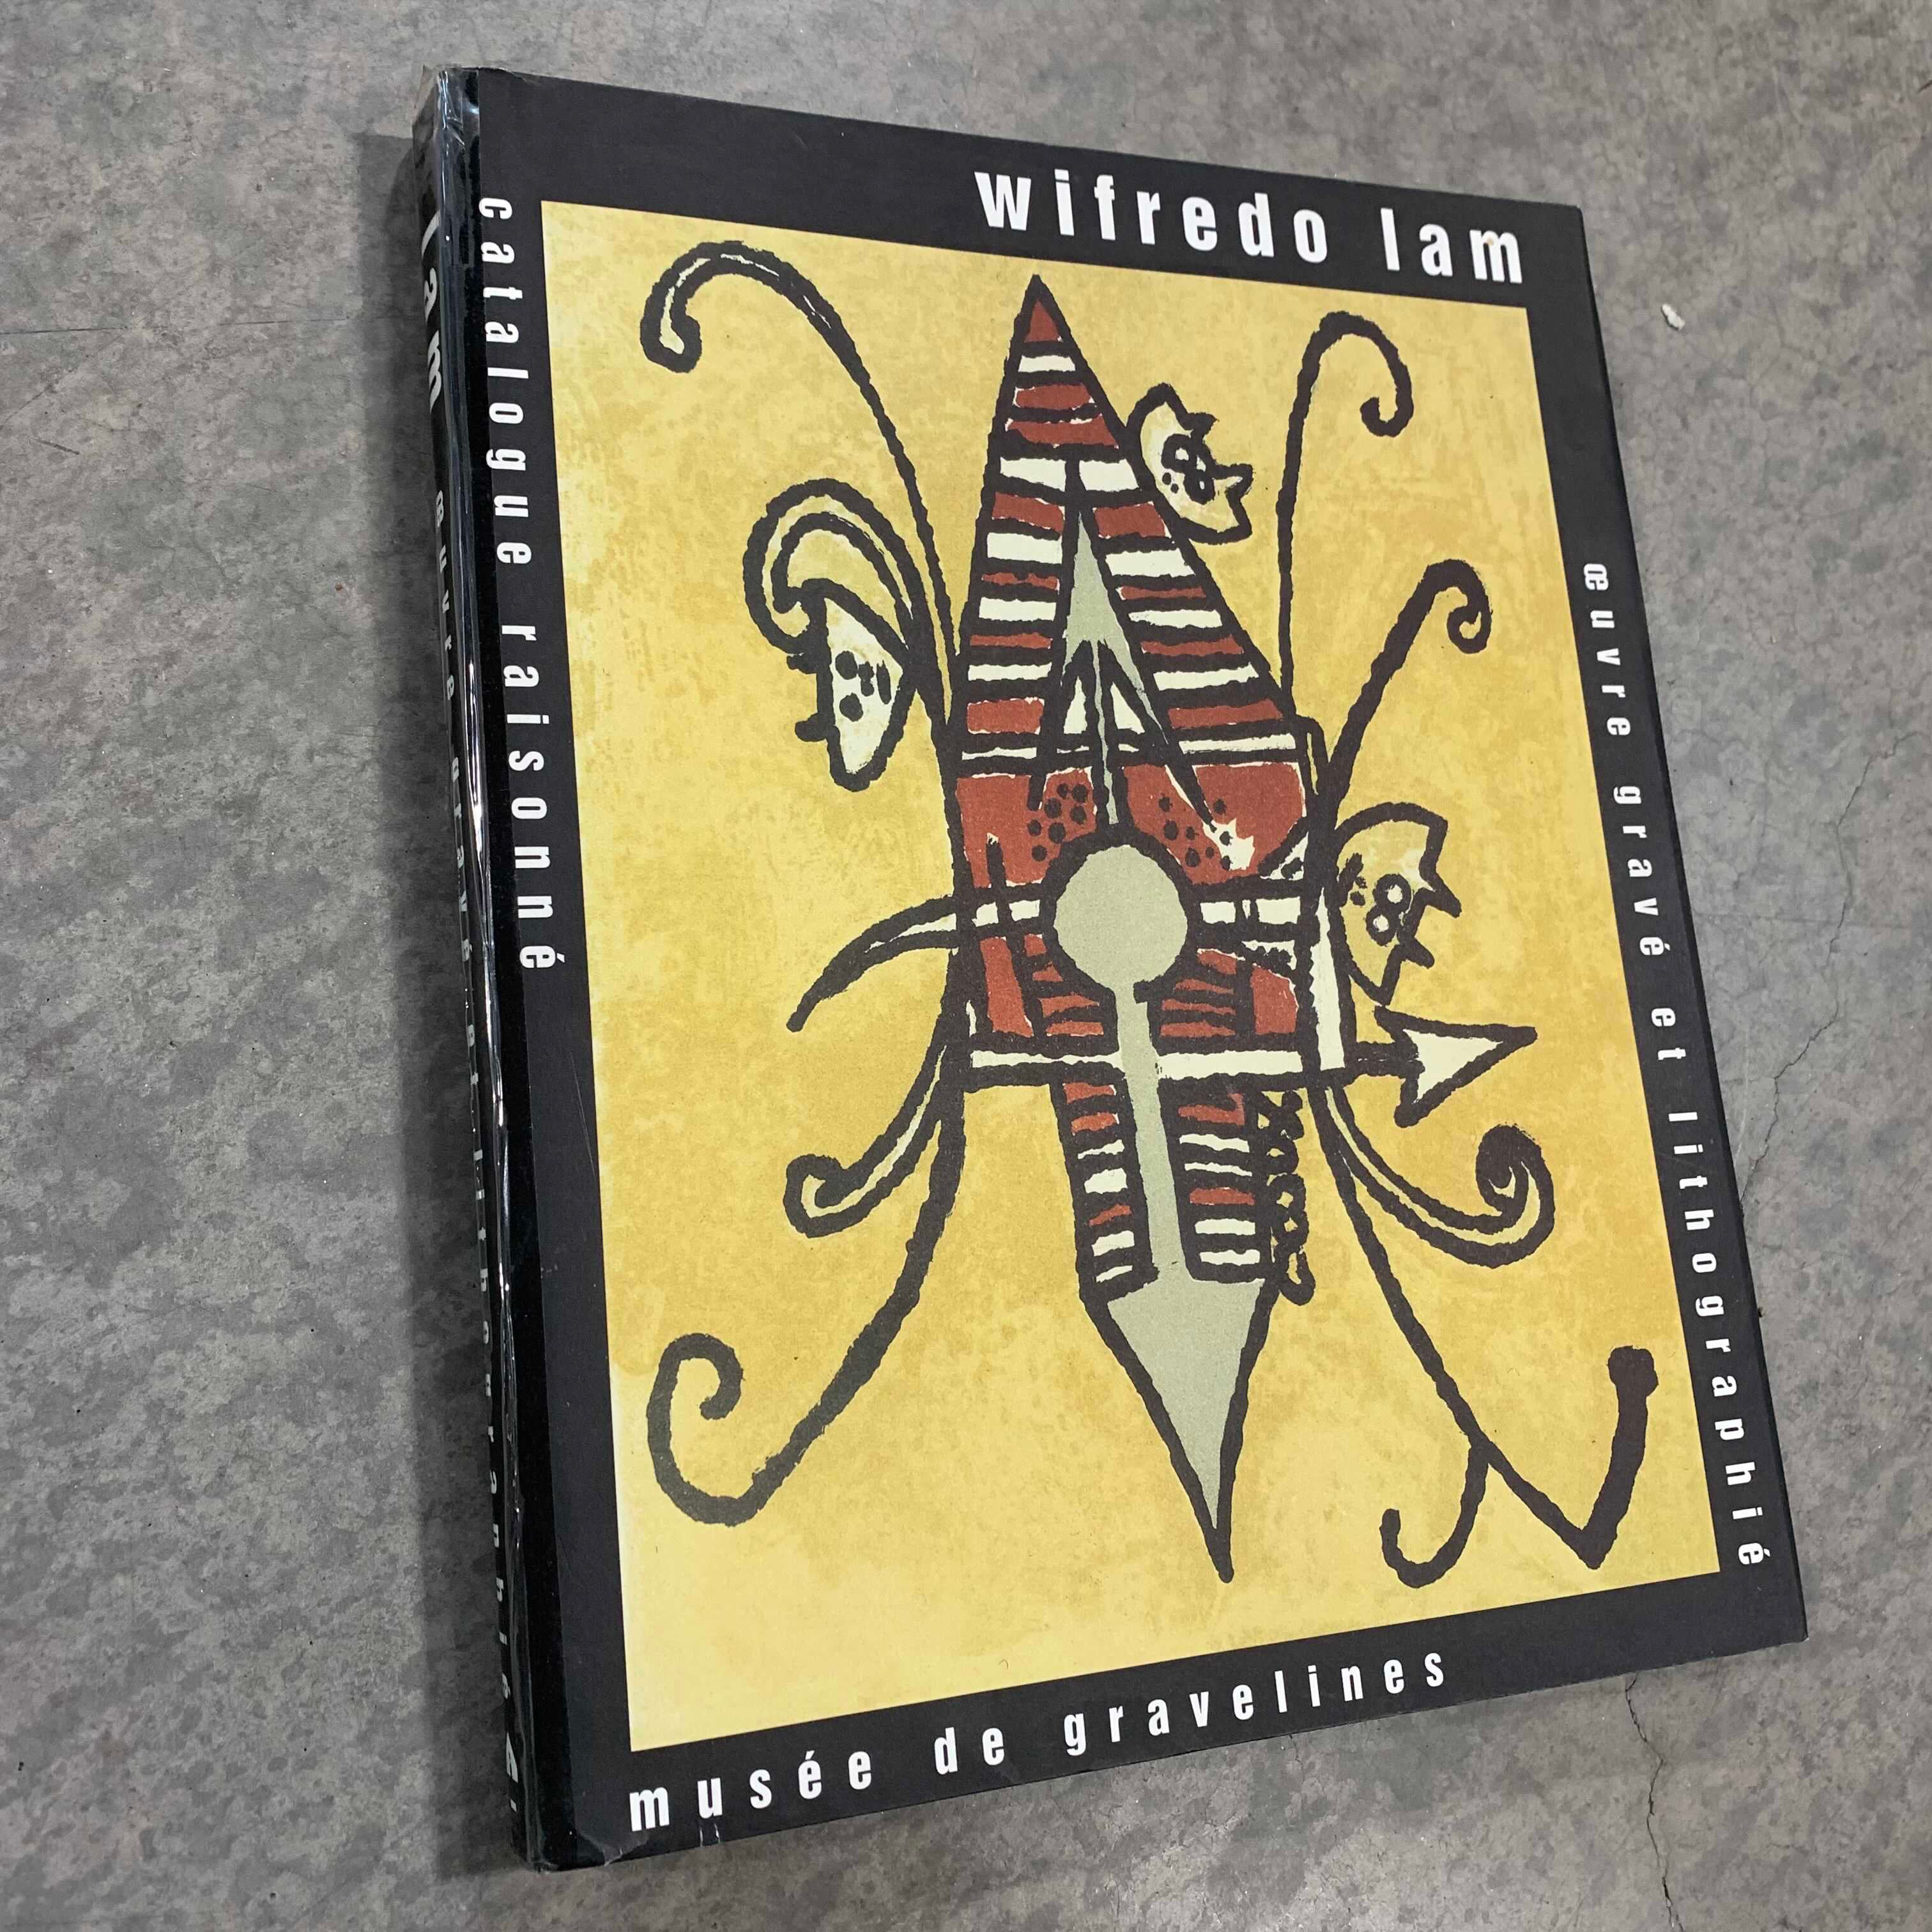 Wilfredo Lam: Oeuvre Grave et Lithographie: Catalogue Rasionne (French Edition)